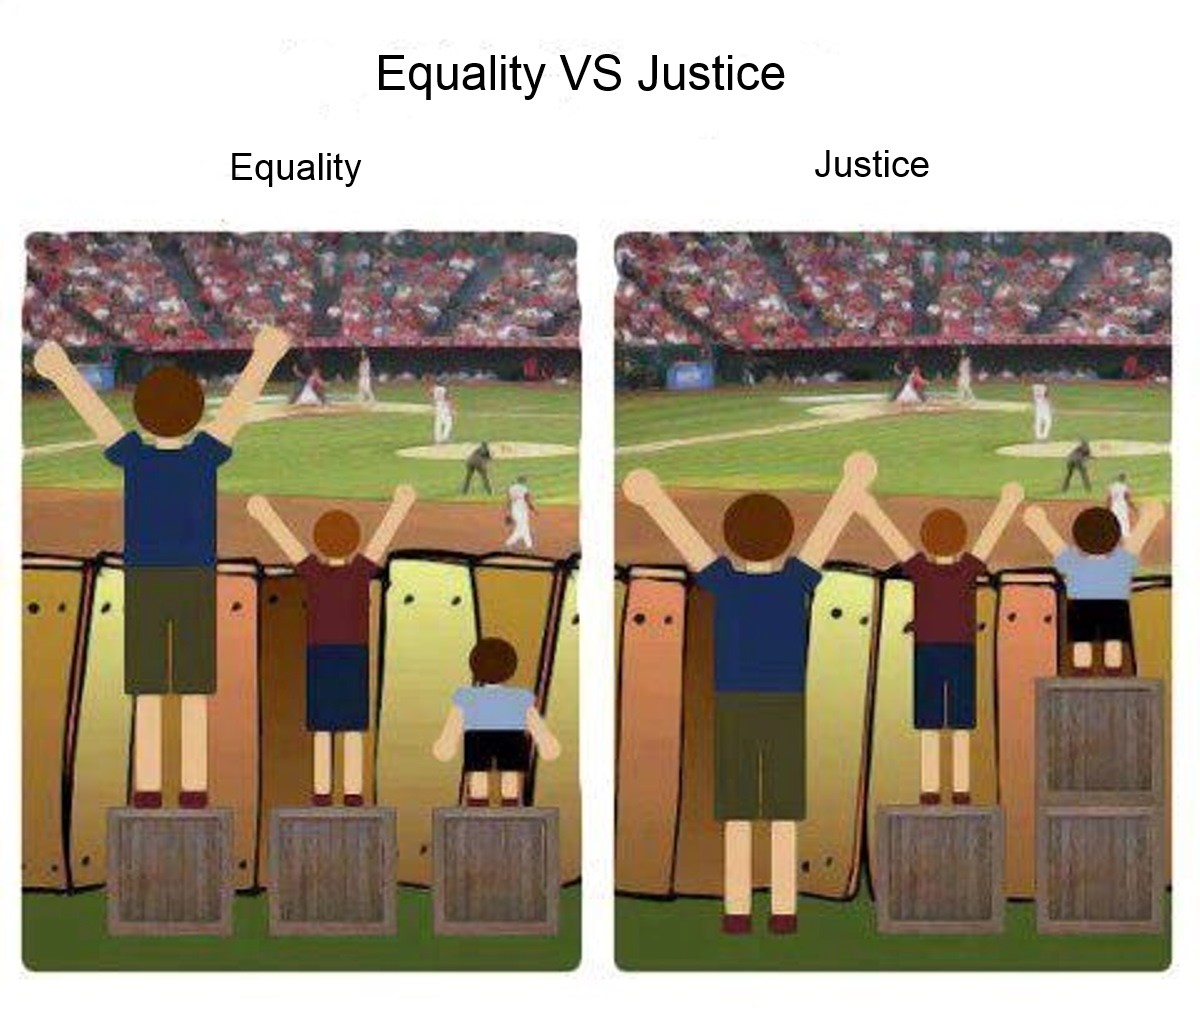 Justice or equality